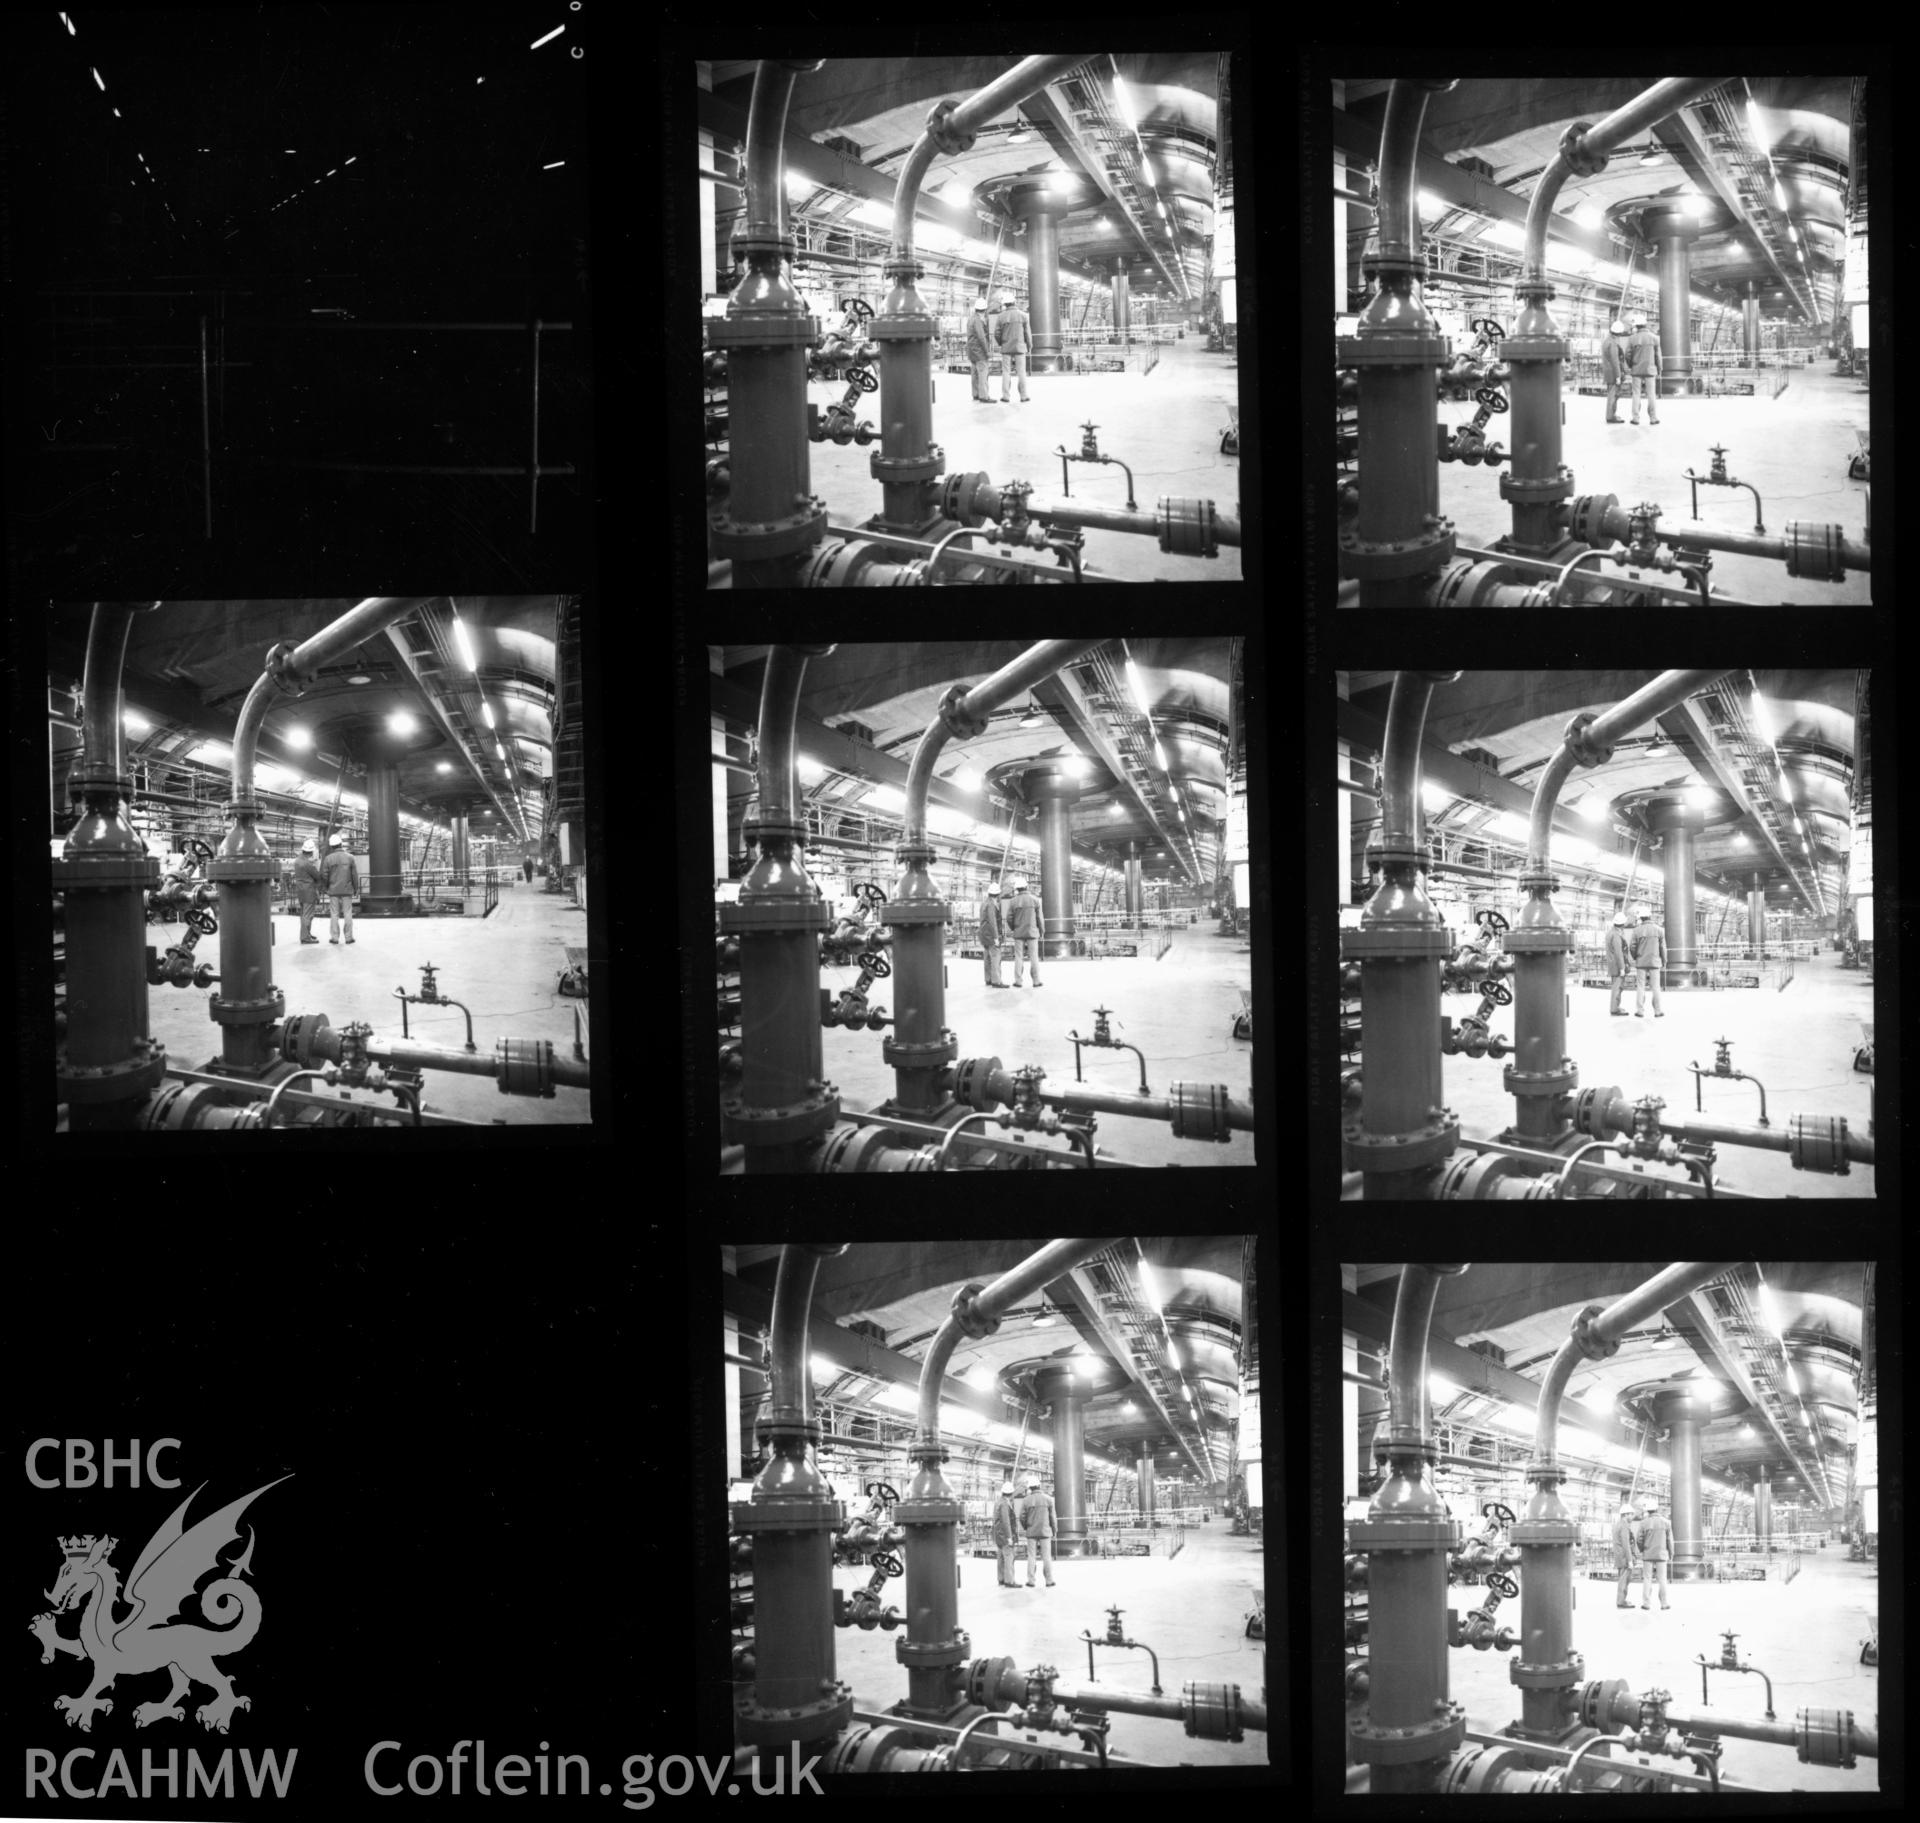 1 contact sheet of 7 b/w photographs showing interior of hall at Dinorwig Power Station; collated by the former Central Office of Information.